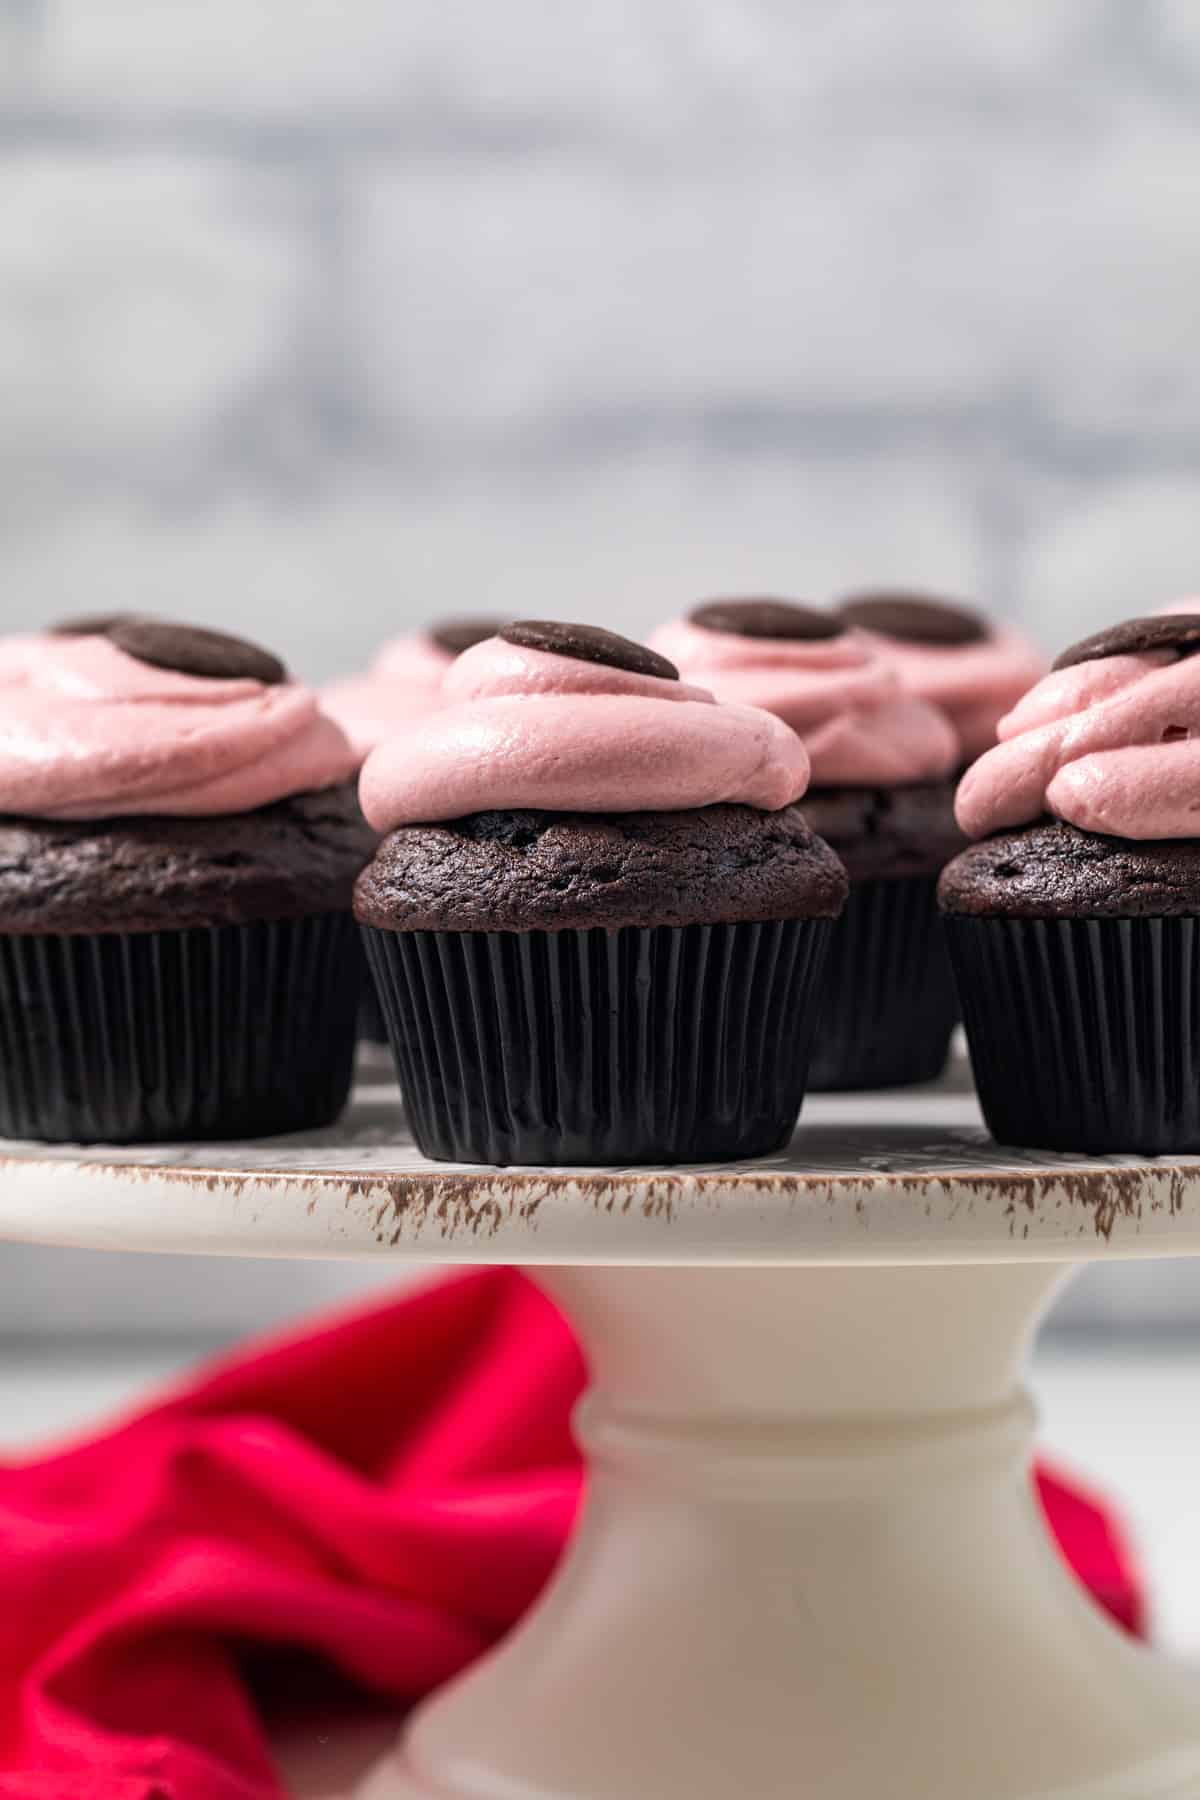 Chocolate raspberry cupcakes on a cake stand.